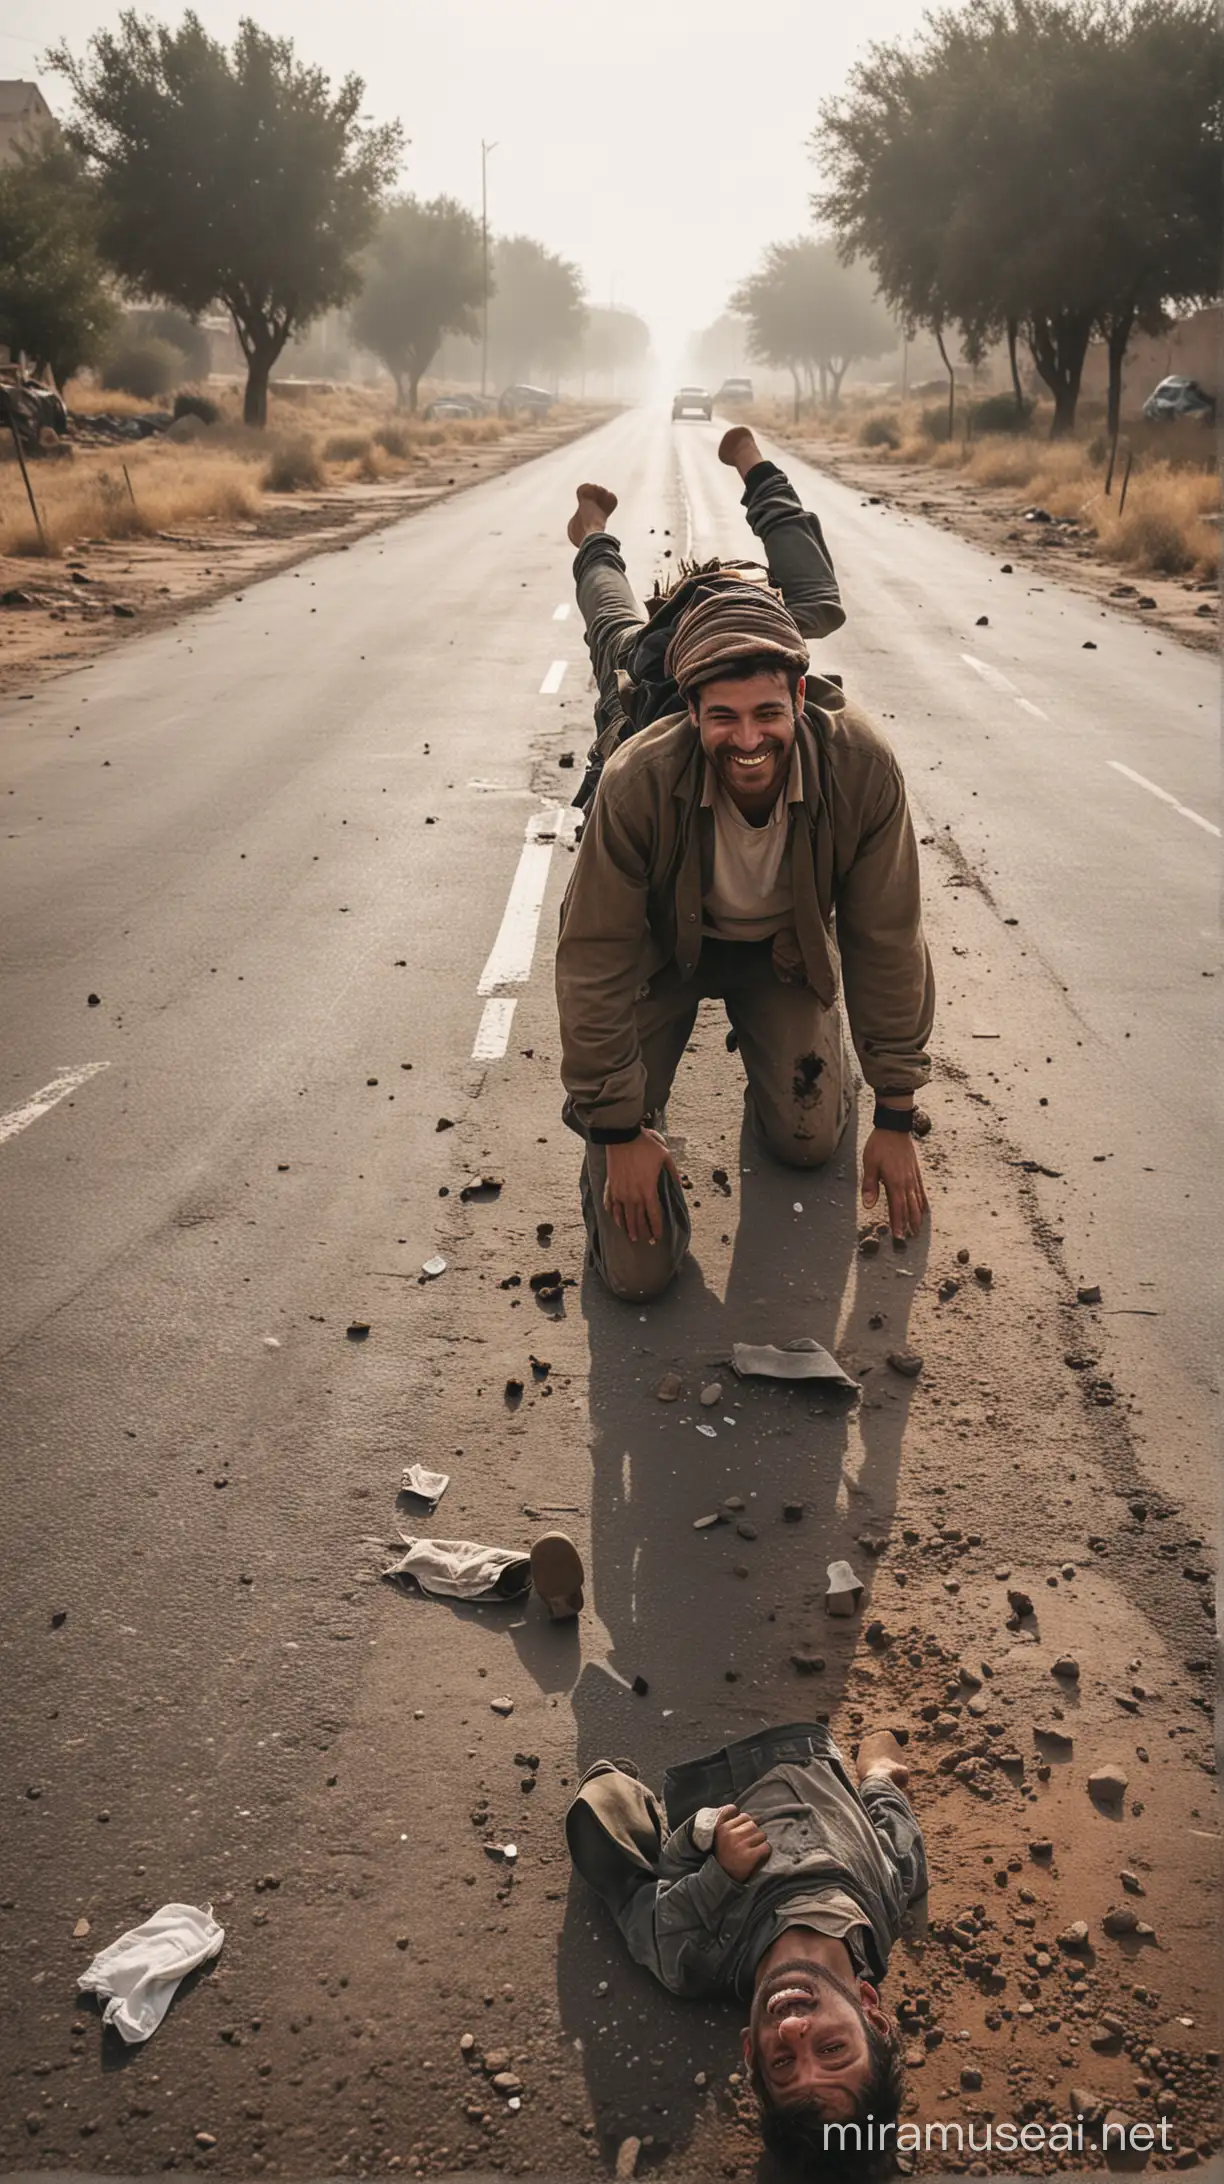 Man Standing Upside Down on Road Dusty Clothes but Smiling